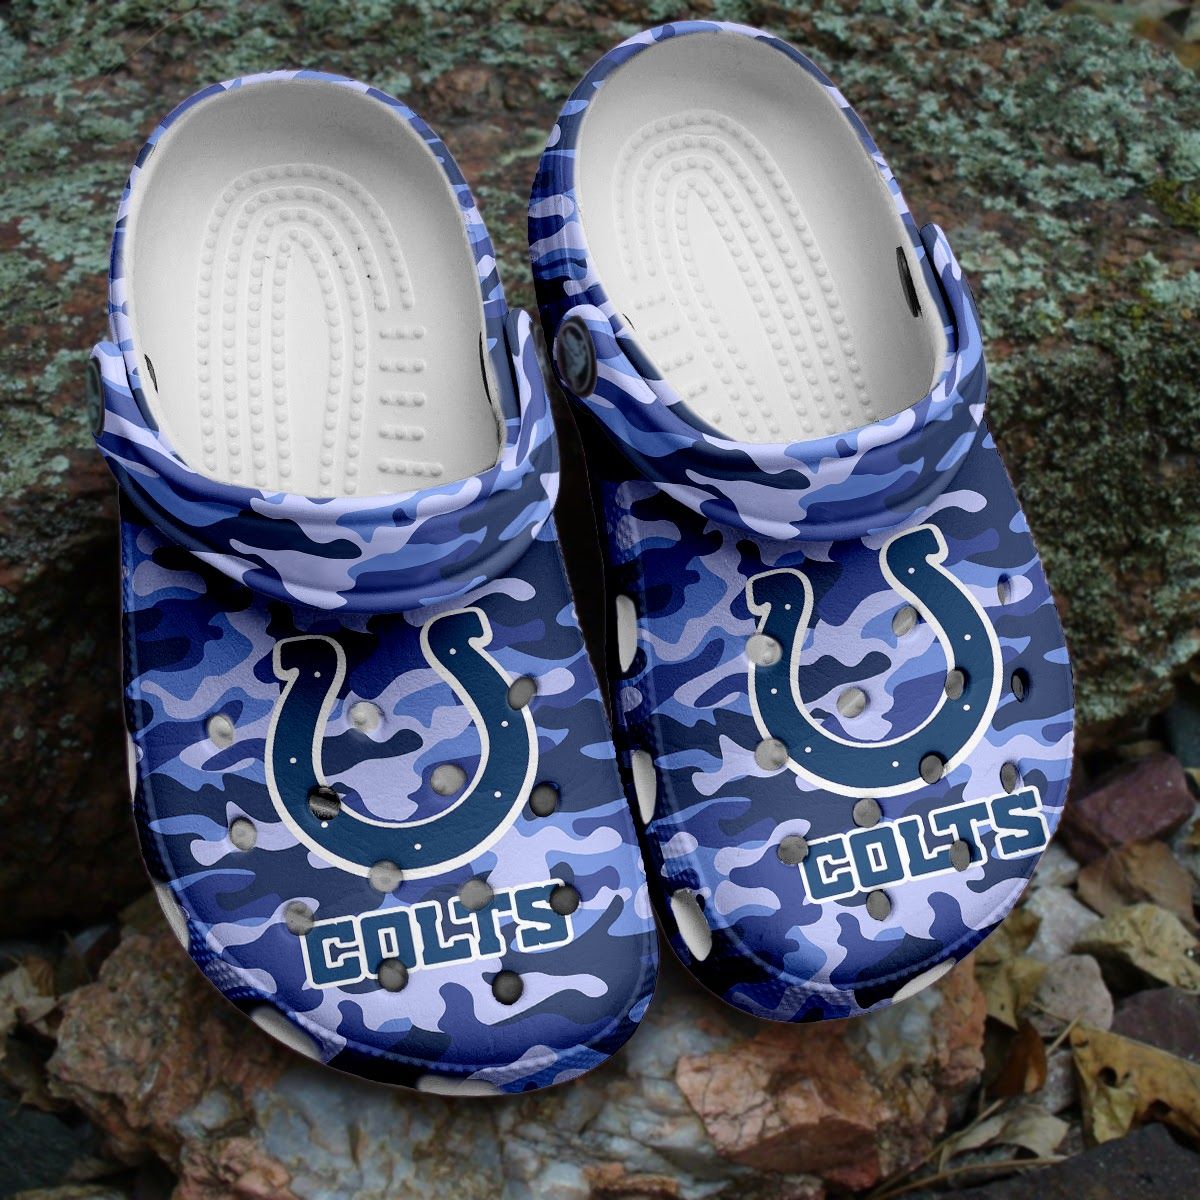 If you'd like to purchase a pair of Crocband Clogs, be sure to check out the official website. 20